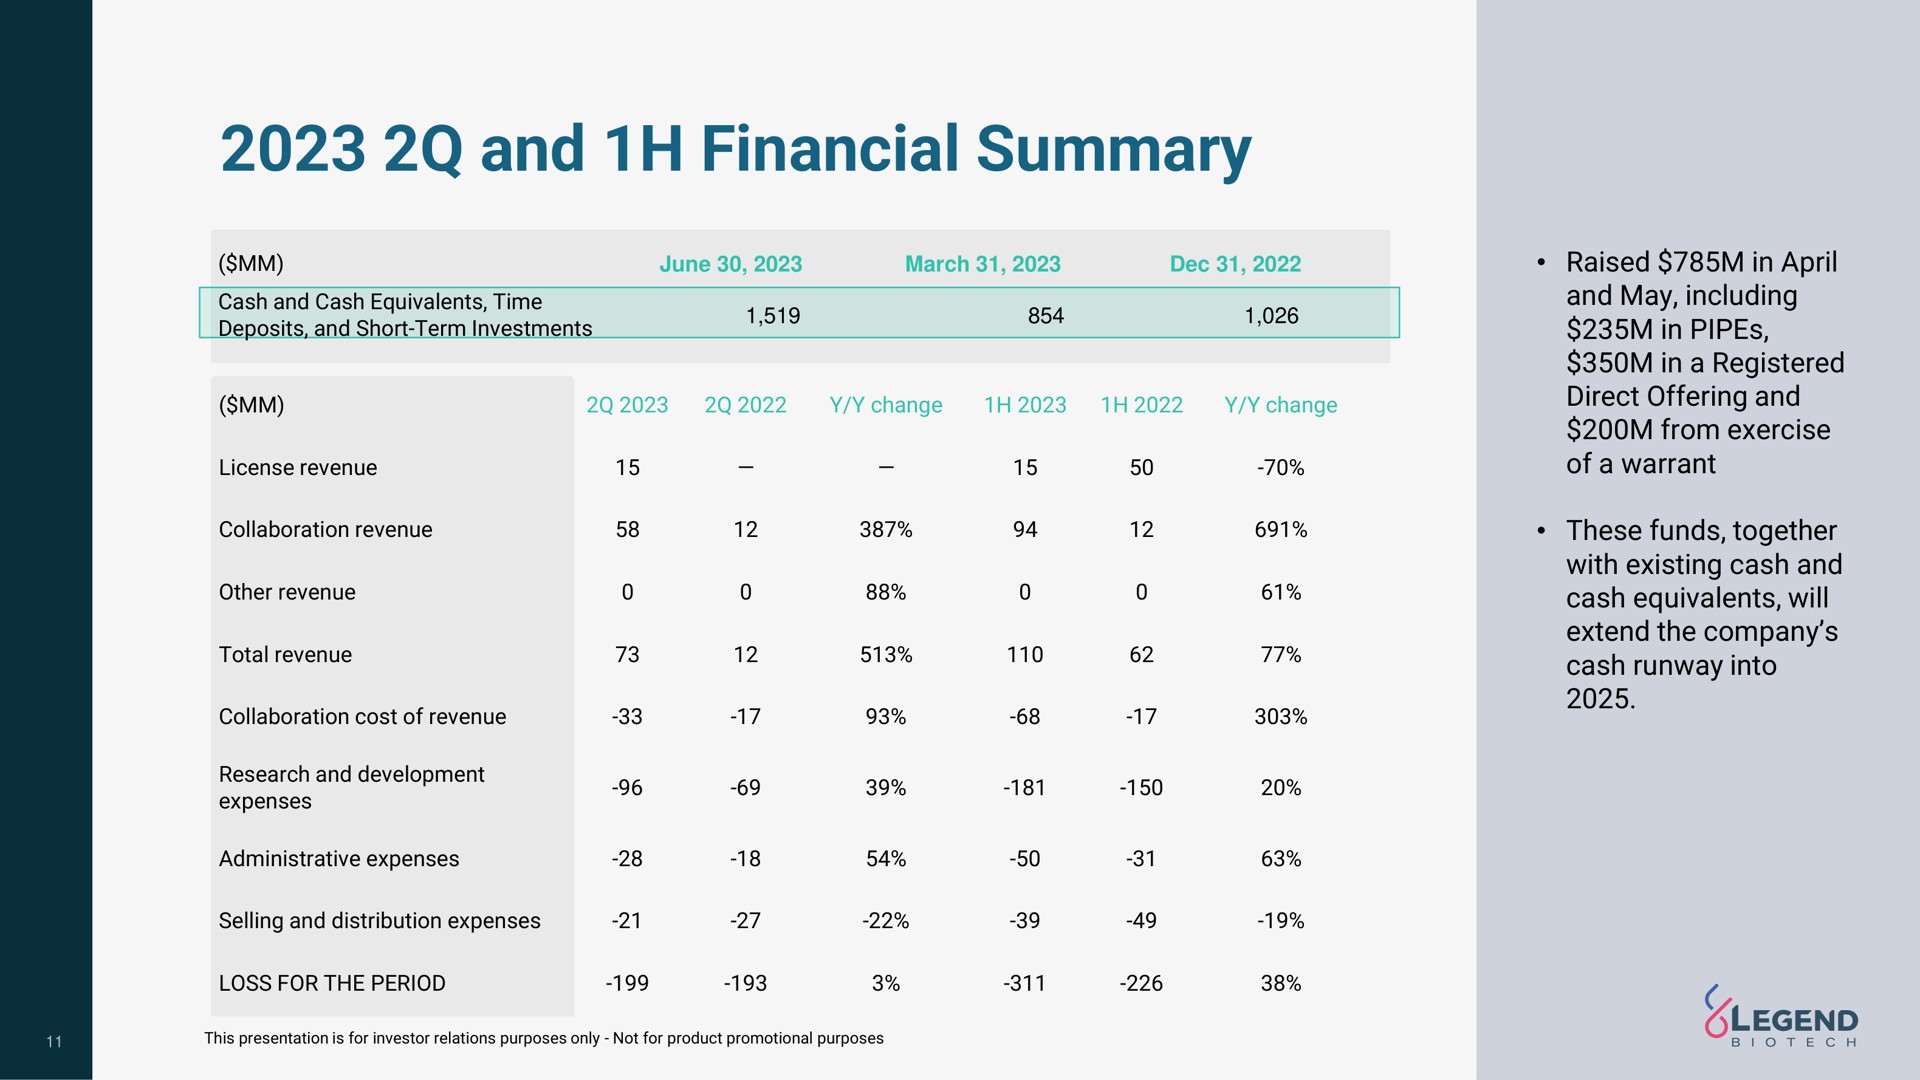 and financial summary | Legend Biotech